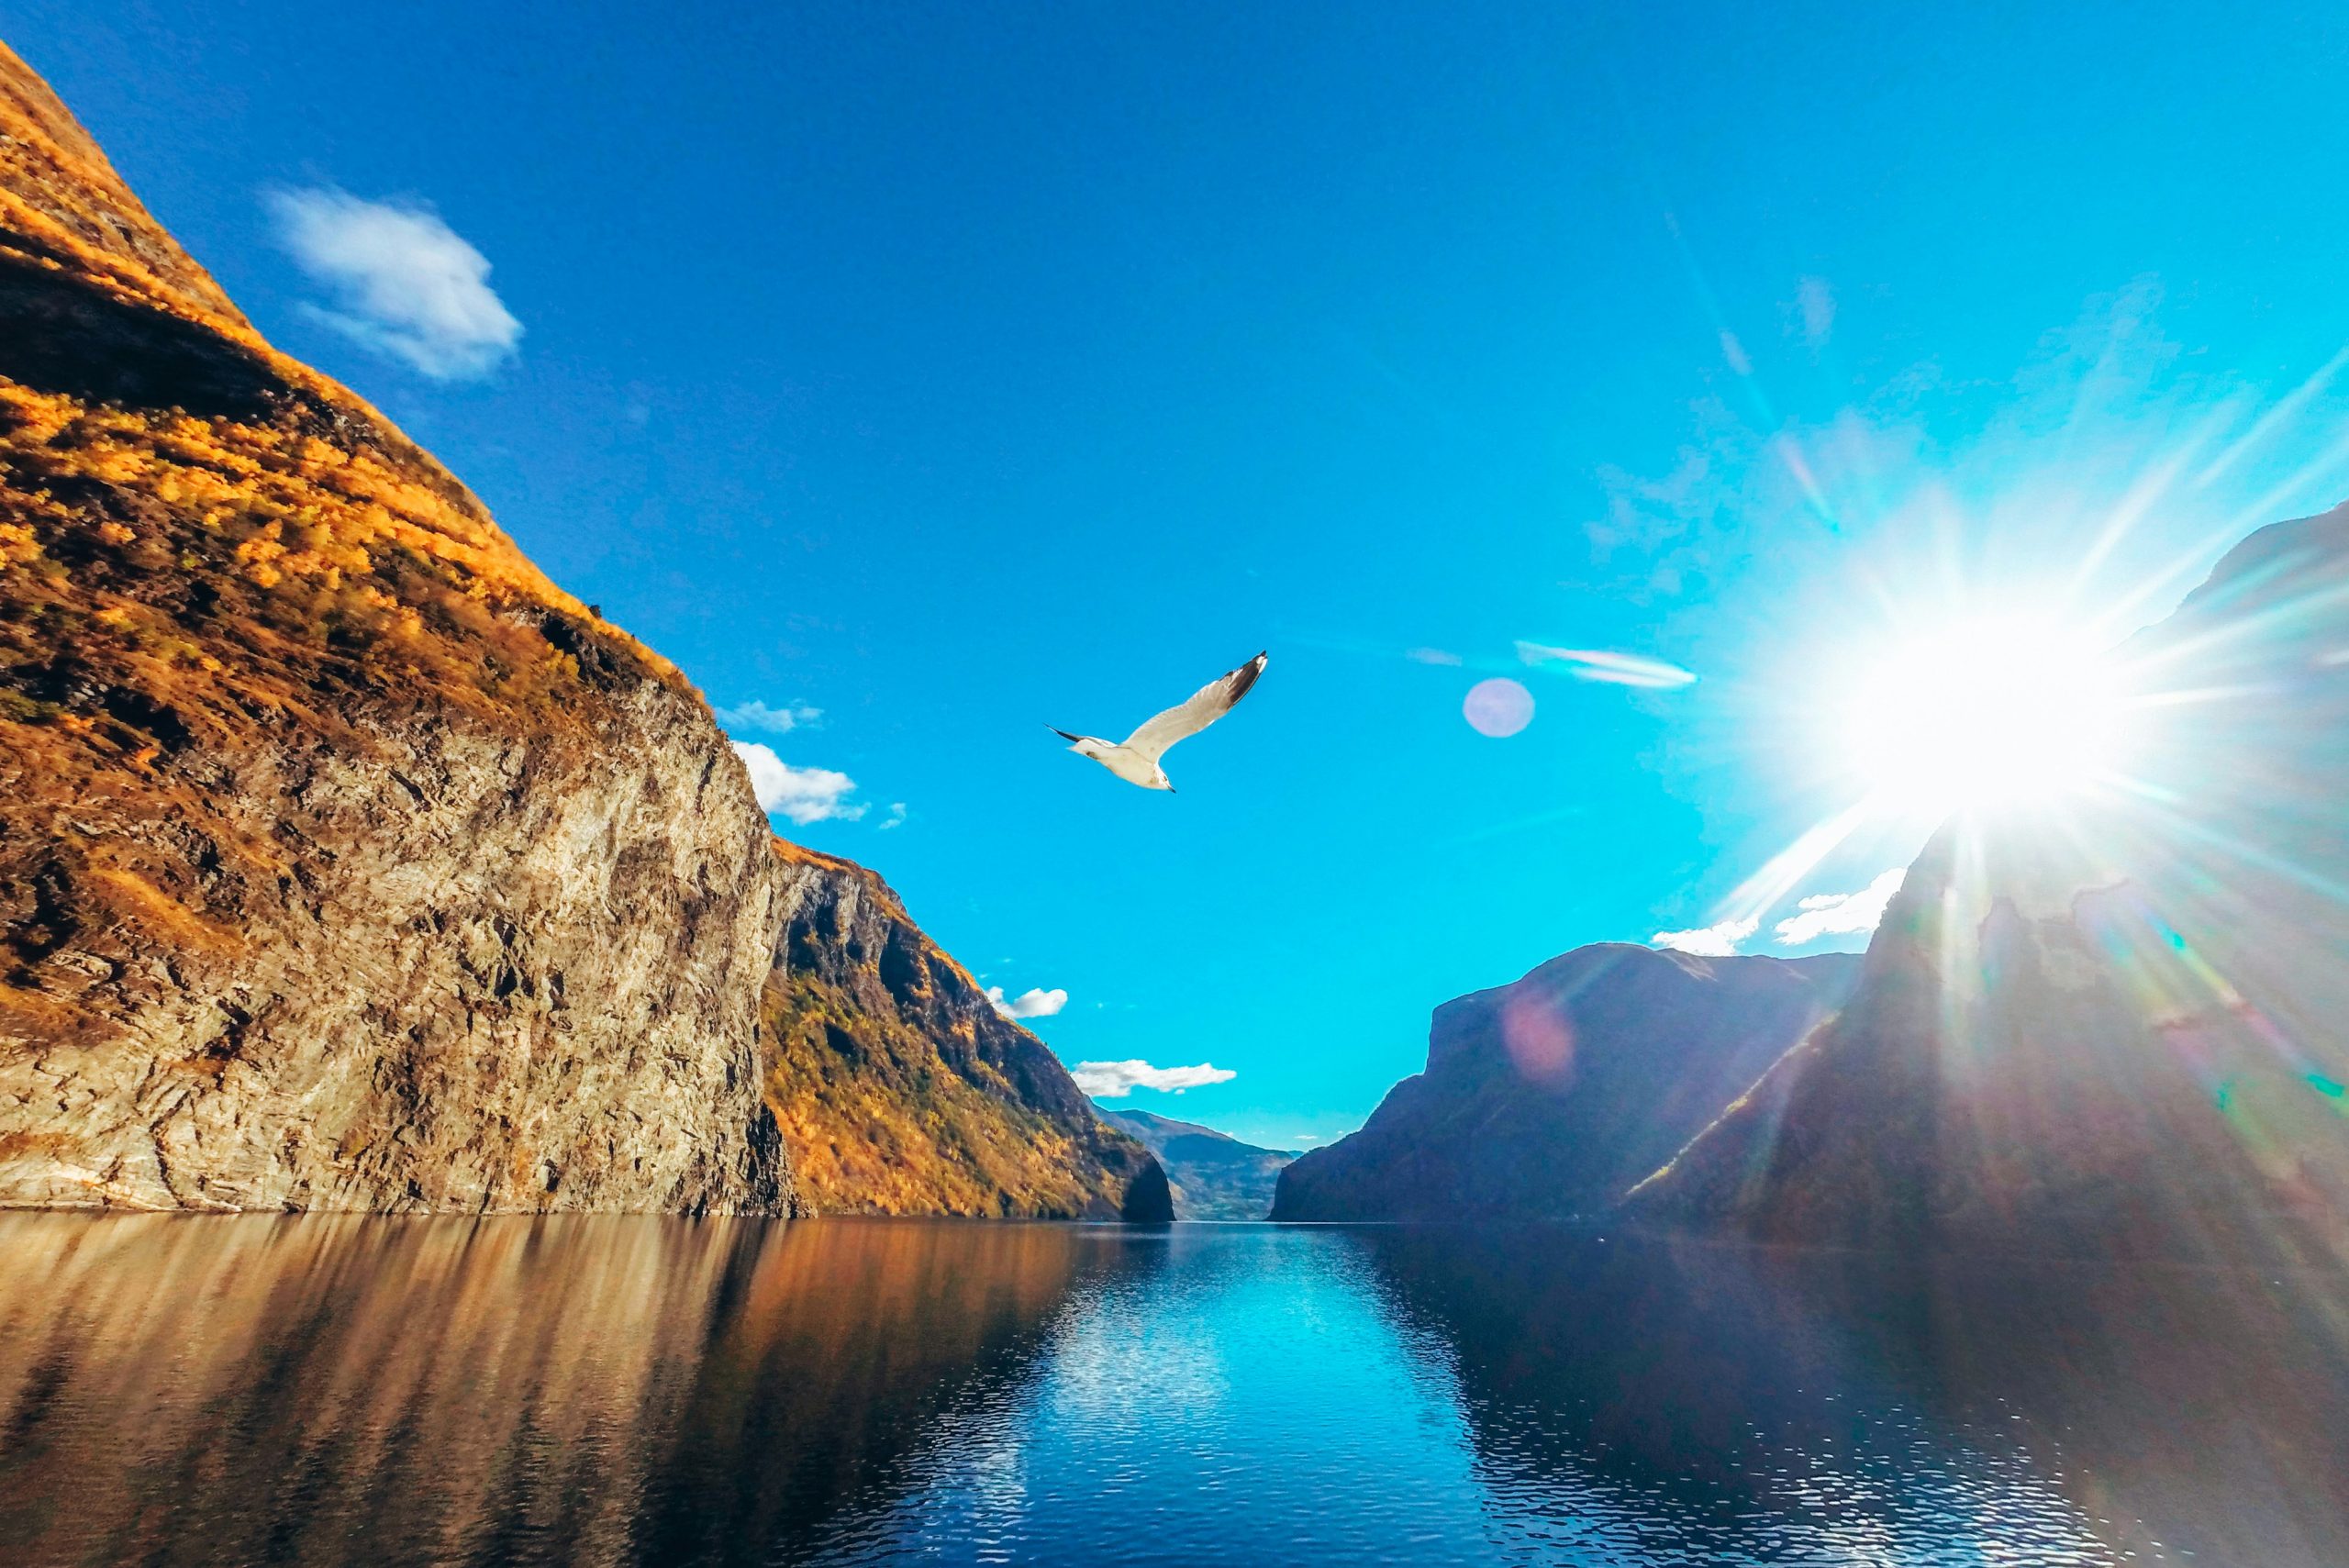 explore the breathtaking beauty of norway's fjords and discover nature at its most spectacular with our guided tours and travel packages.